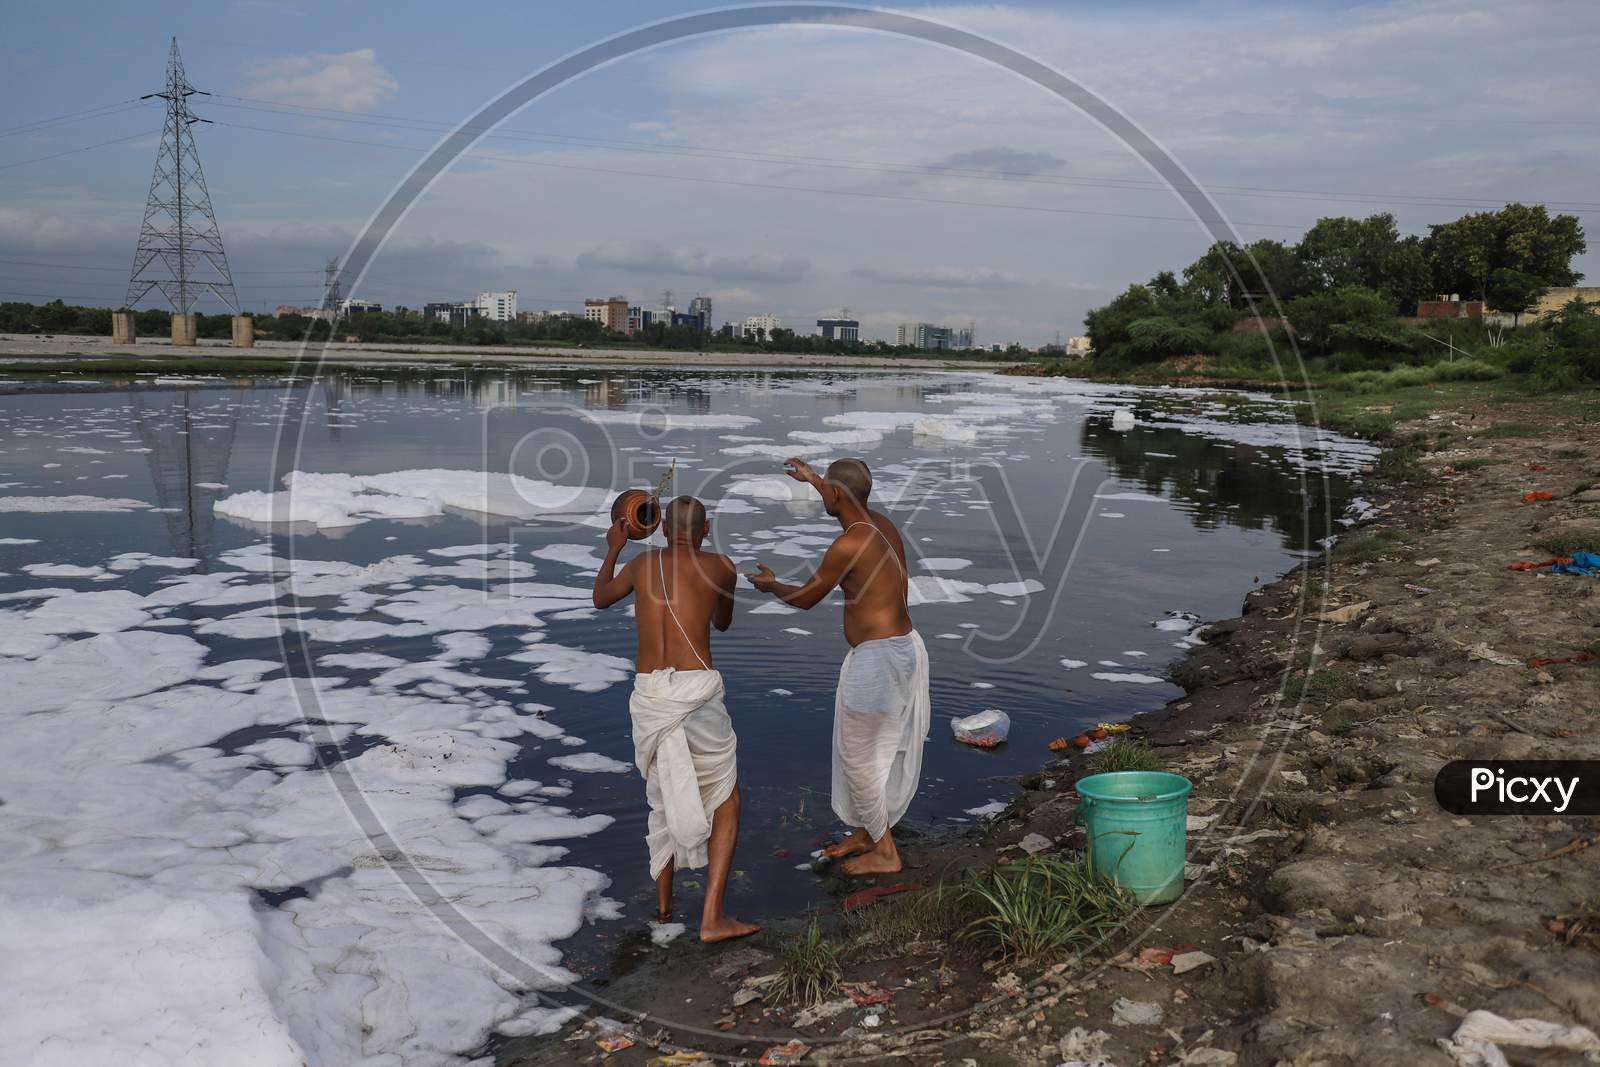 Hindu Devotees Throw Religious Offerings In River Yamuna On July 30, 2020 In New Delhi, India.